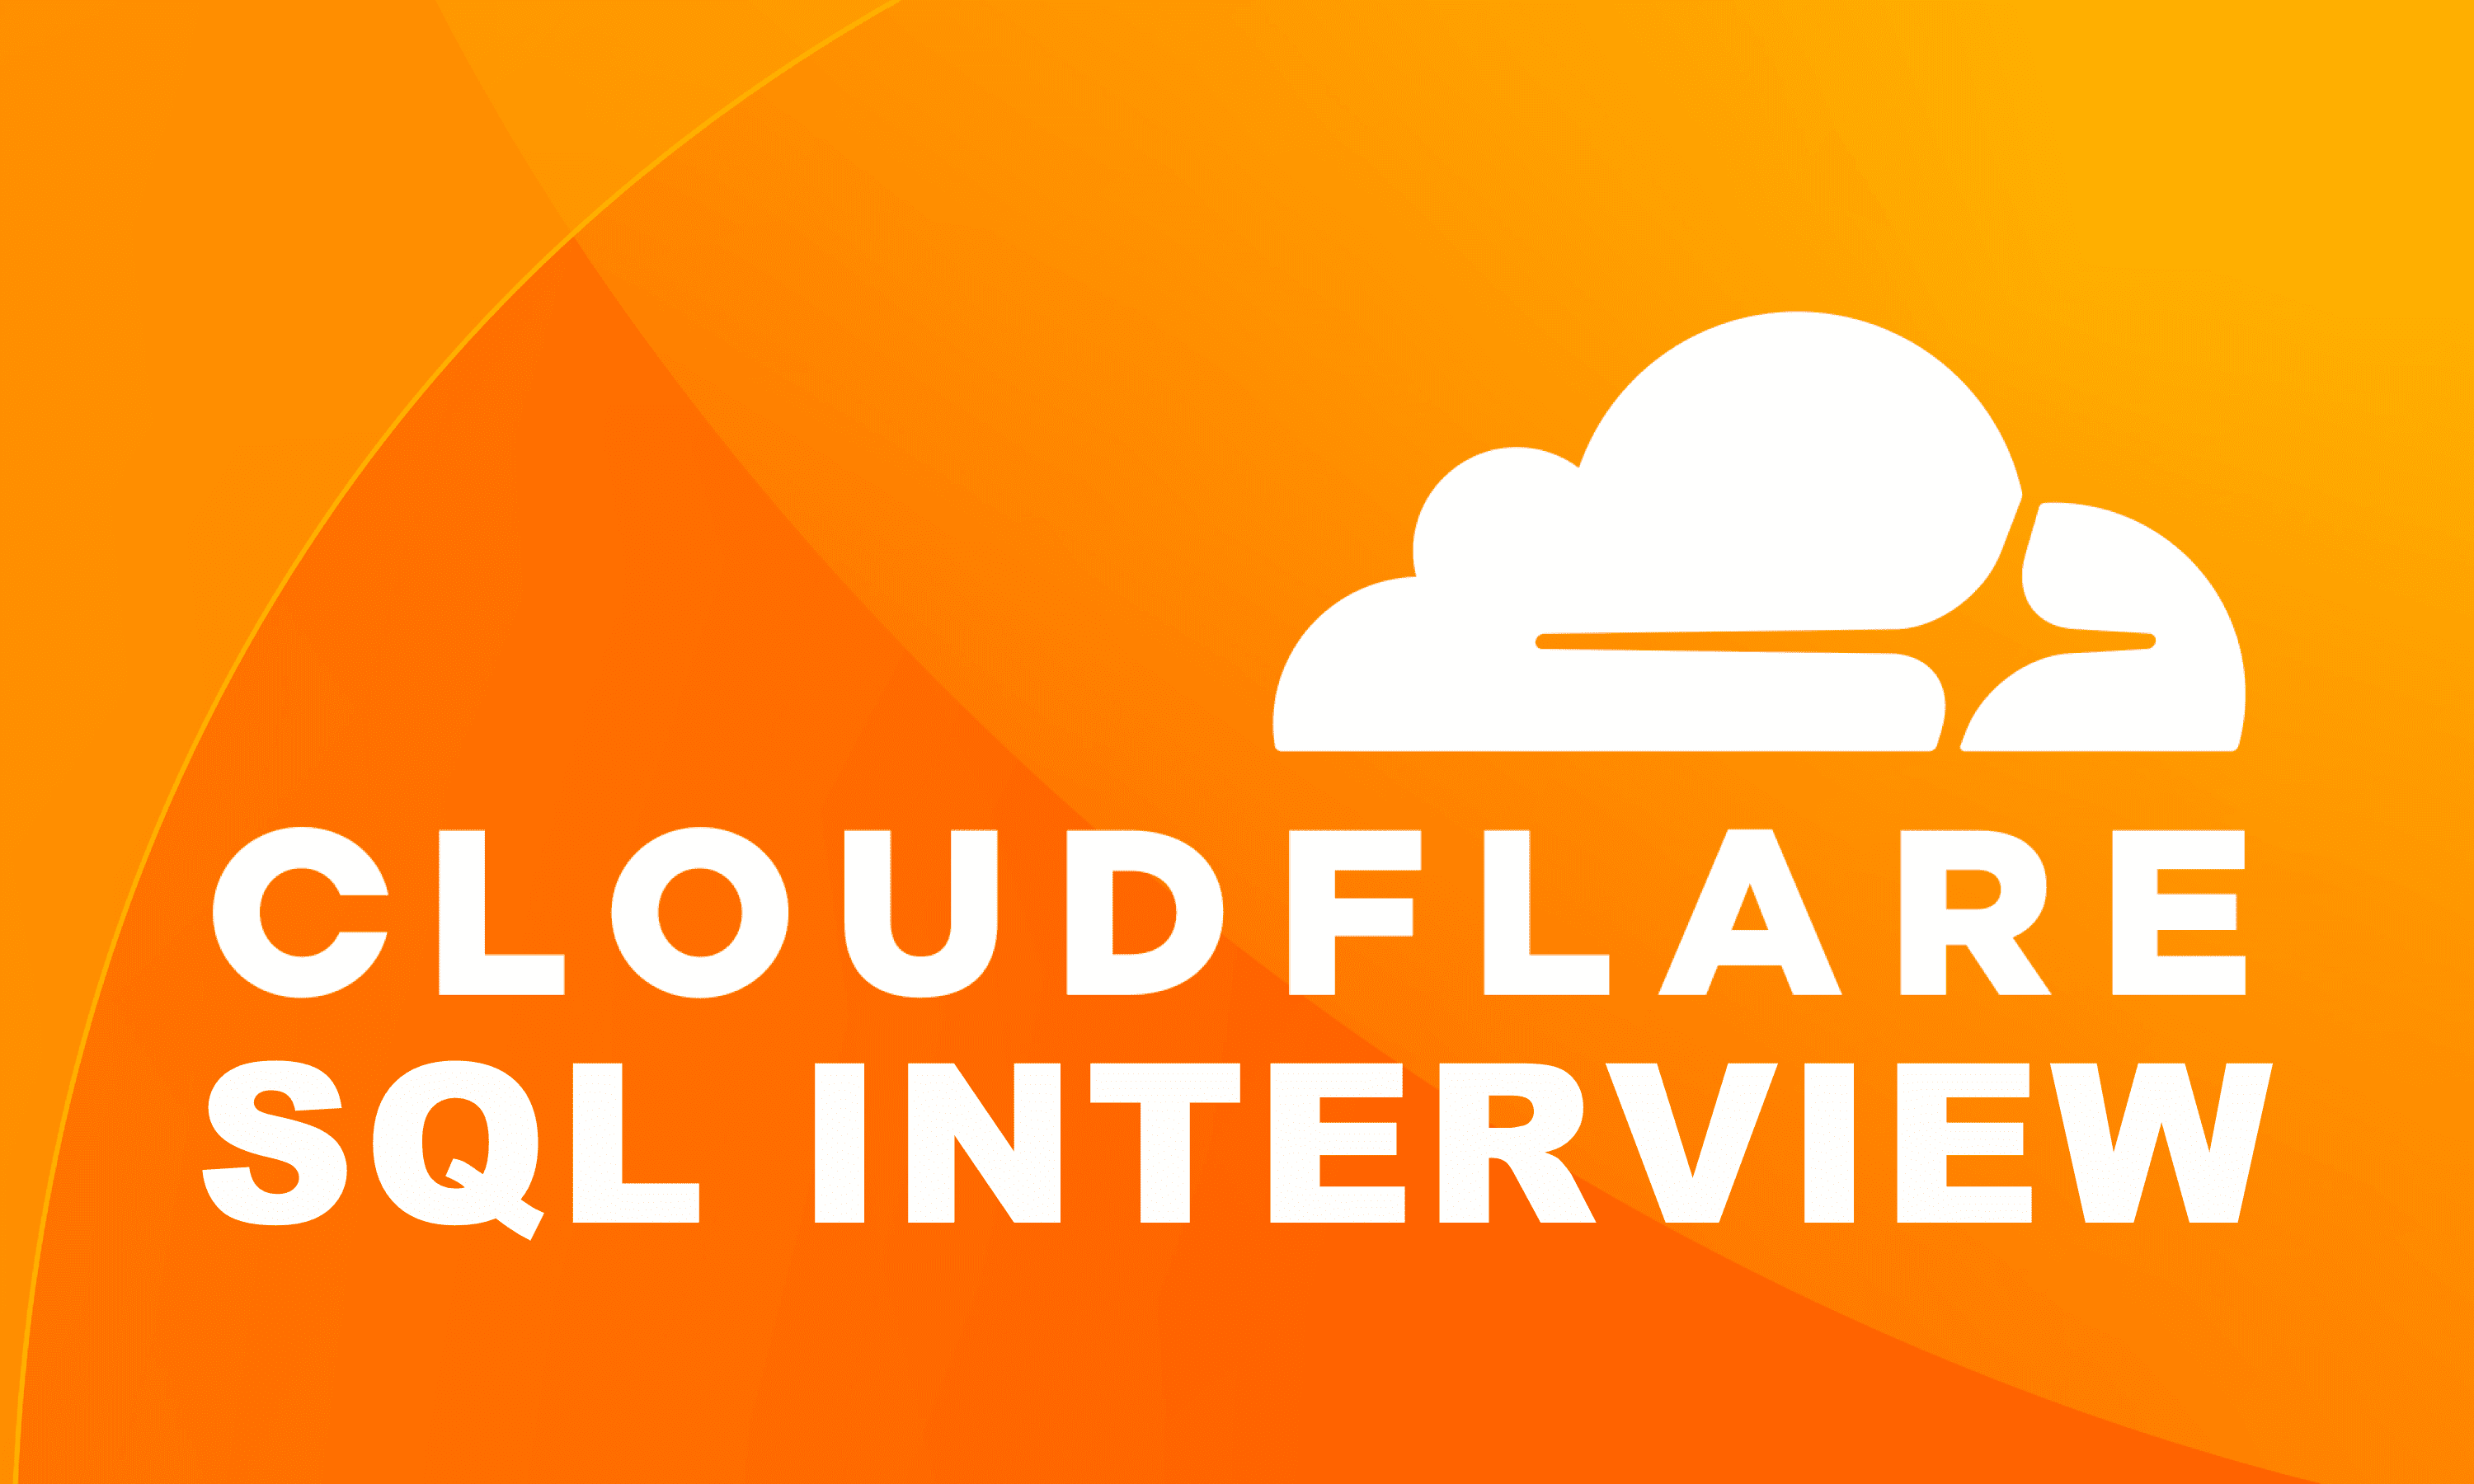 Cloudflare SQL Interview Questions